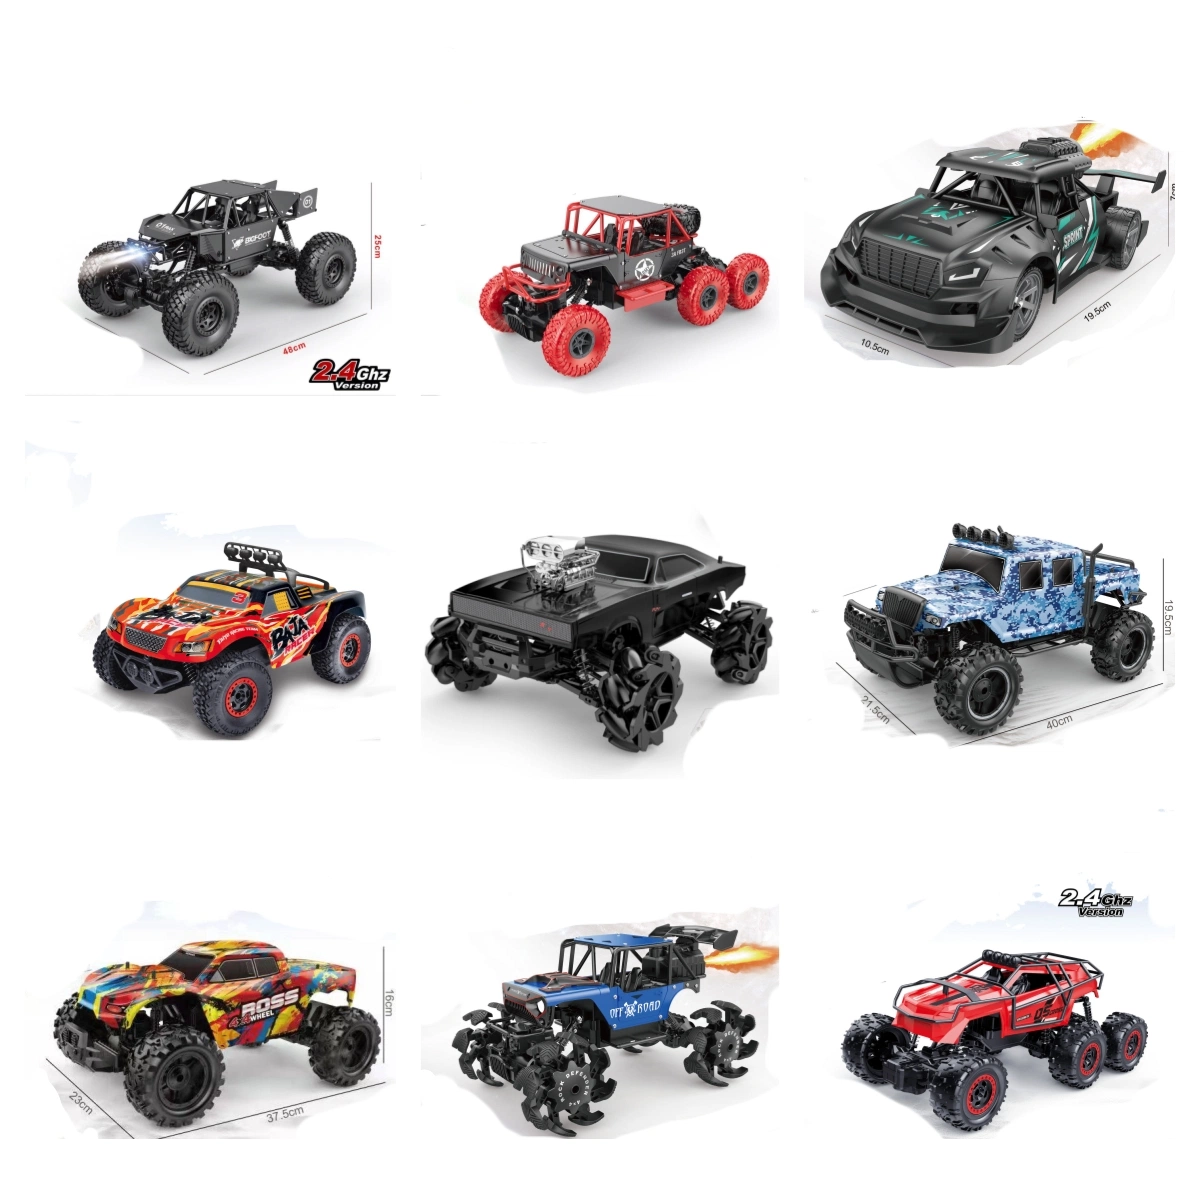 2.4G 1: 16 RC High Speed Toy Car Metal & Plastic Available Plastic Toy Electric Toy Baby Toy Promotion Gift Car Kids Toy RC Model Car Children Toy